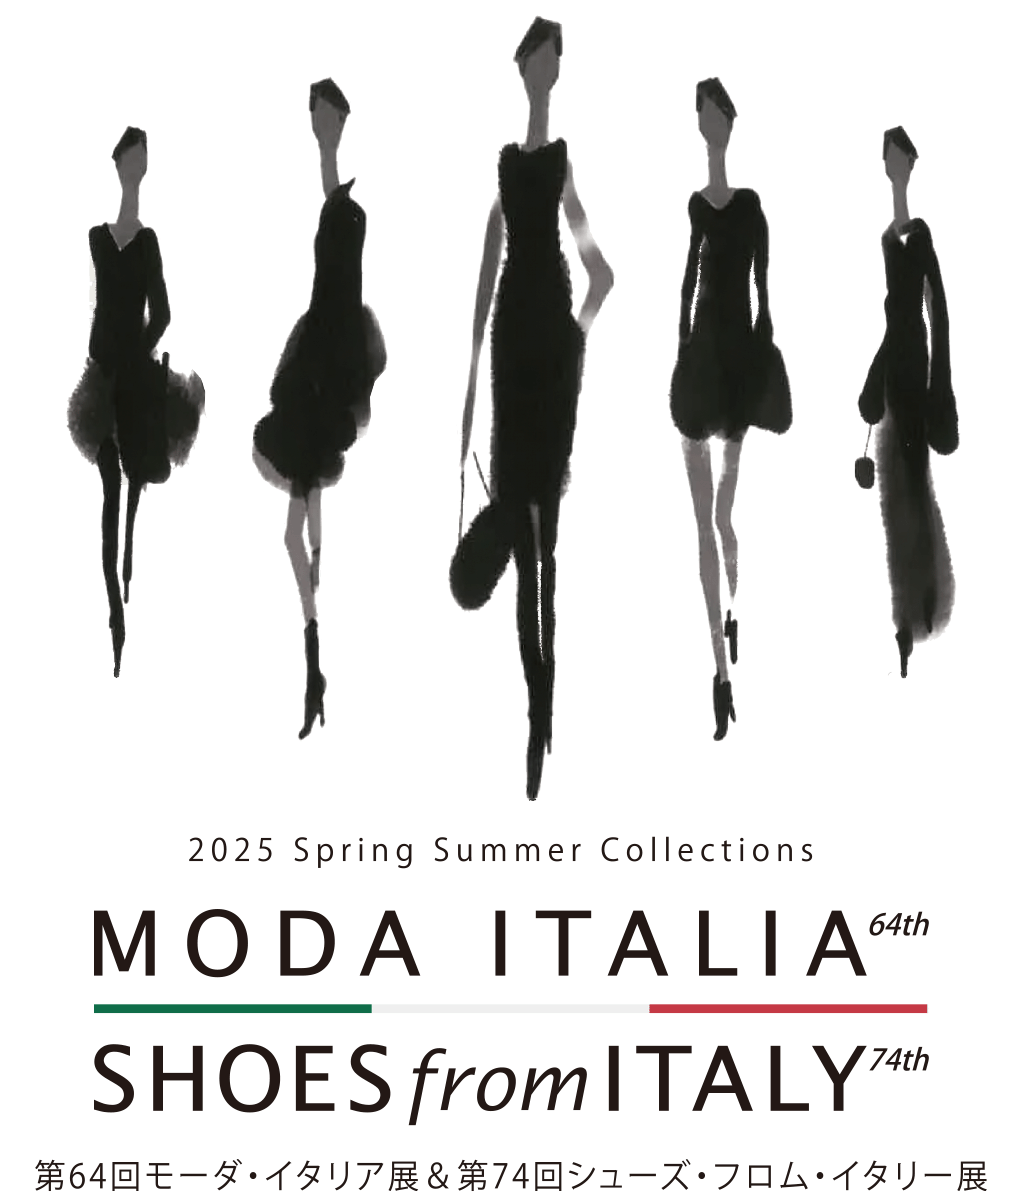 2025 spring summer Collections MODA ITALIA 64th & SHOES from ITALY 74th